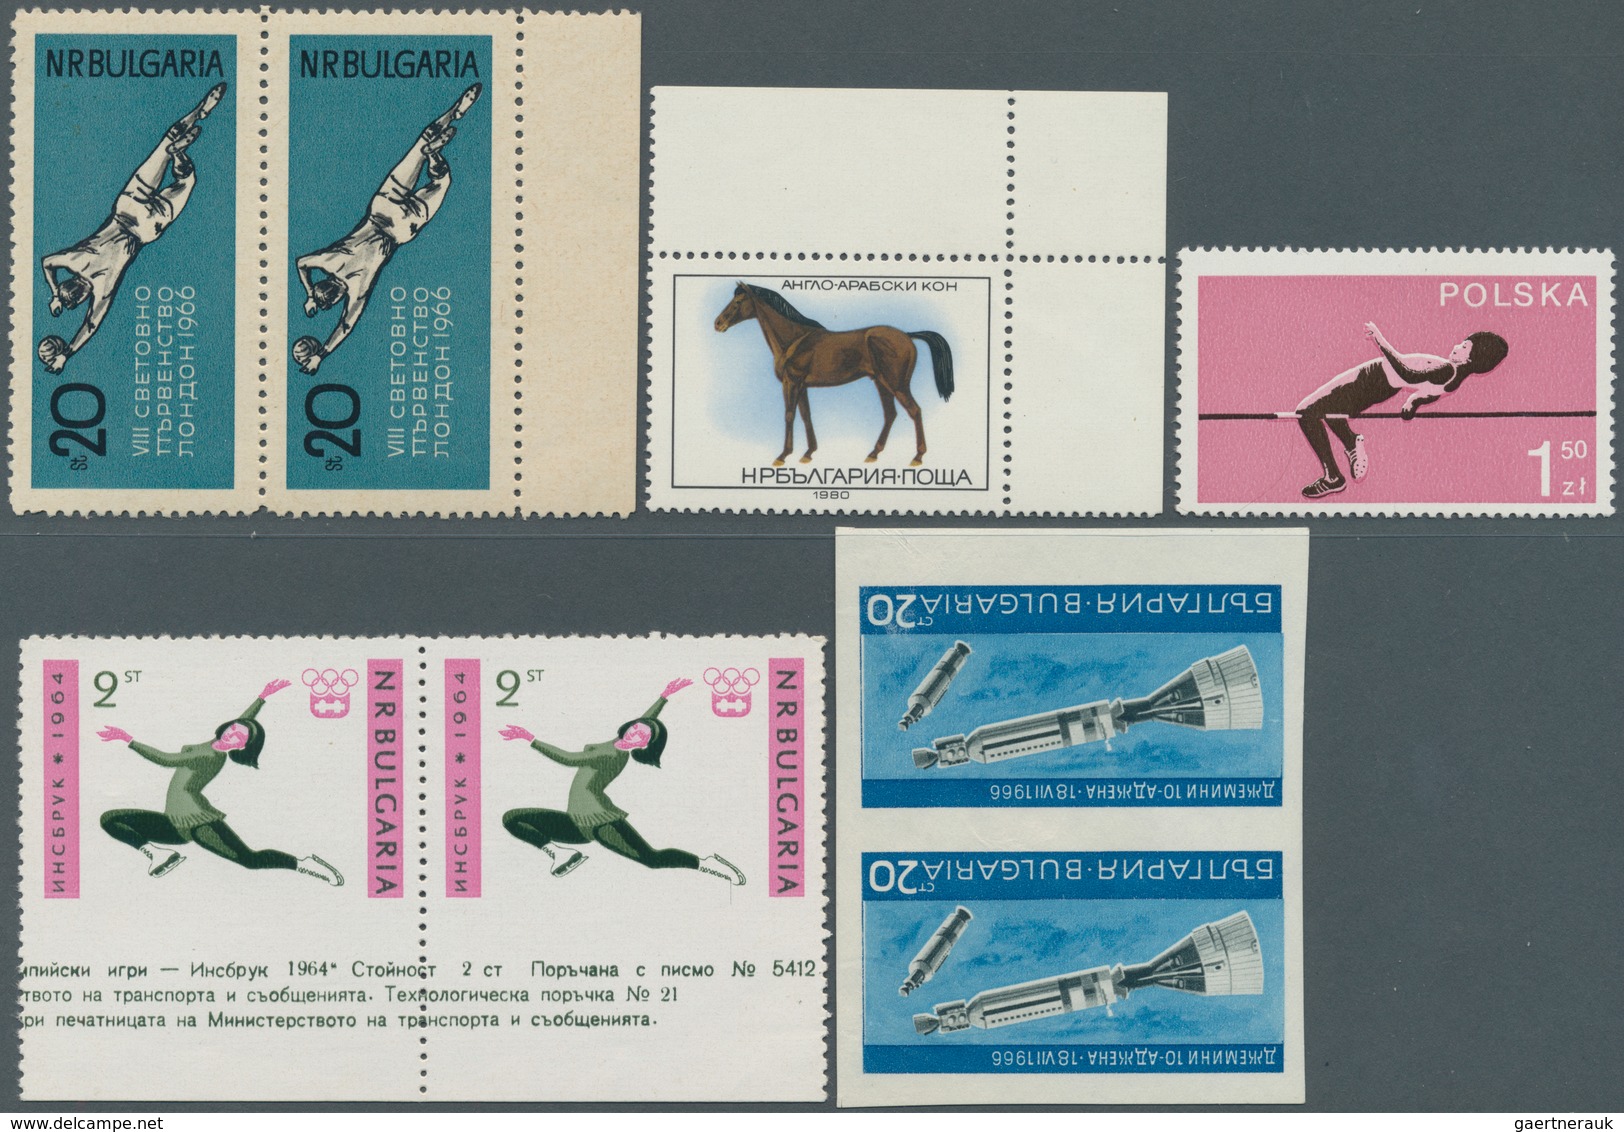 26202 Bulgarien: 1960/1980 (approx). Interesting lot containing a great number of VARIETIES: missing color